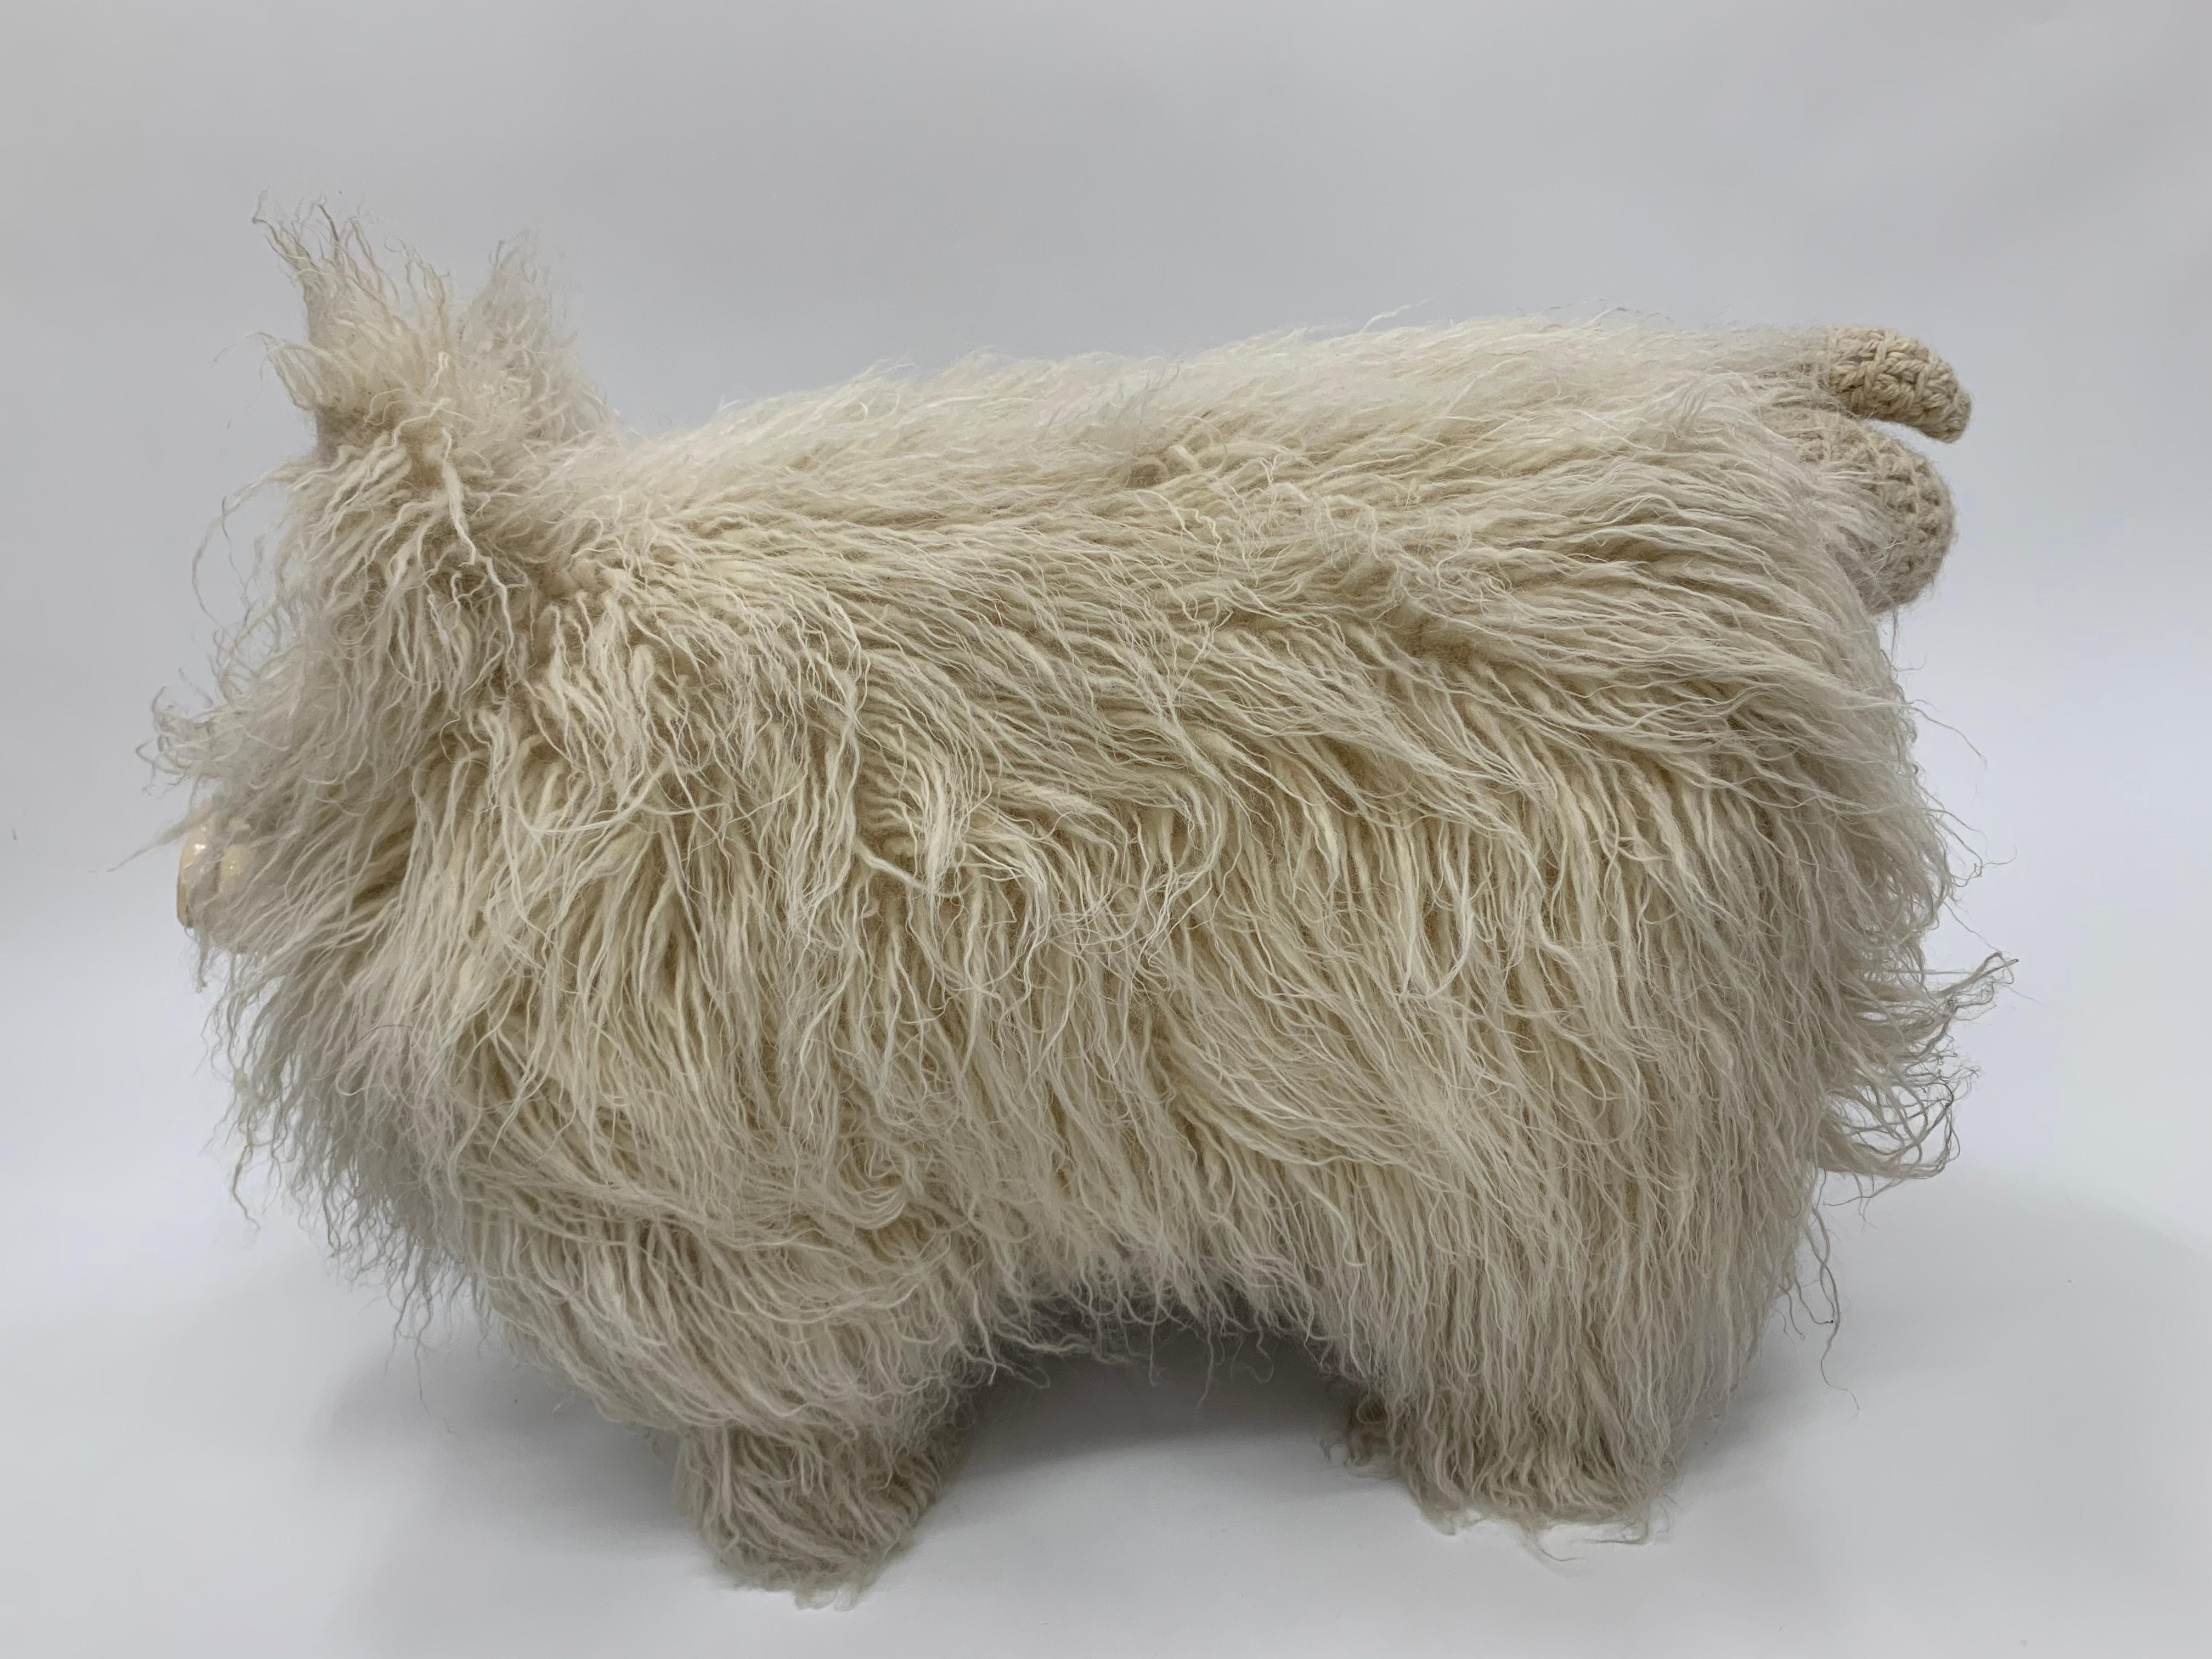 Sculptural Edna Cataldo Pig Flokati Wool Foot Stool, Signed and Dated 1995 3